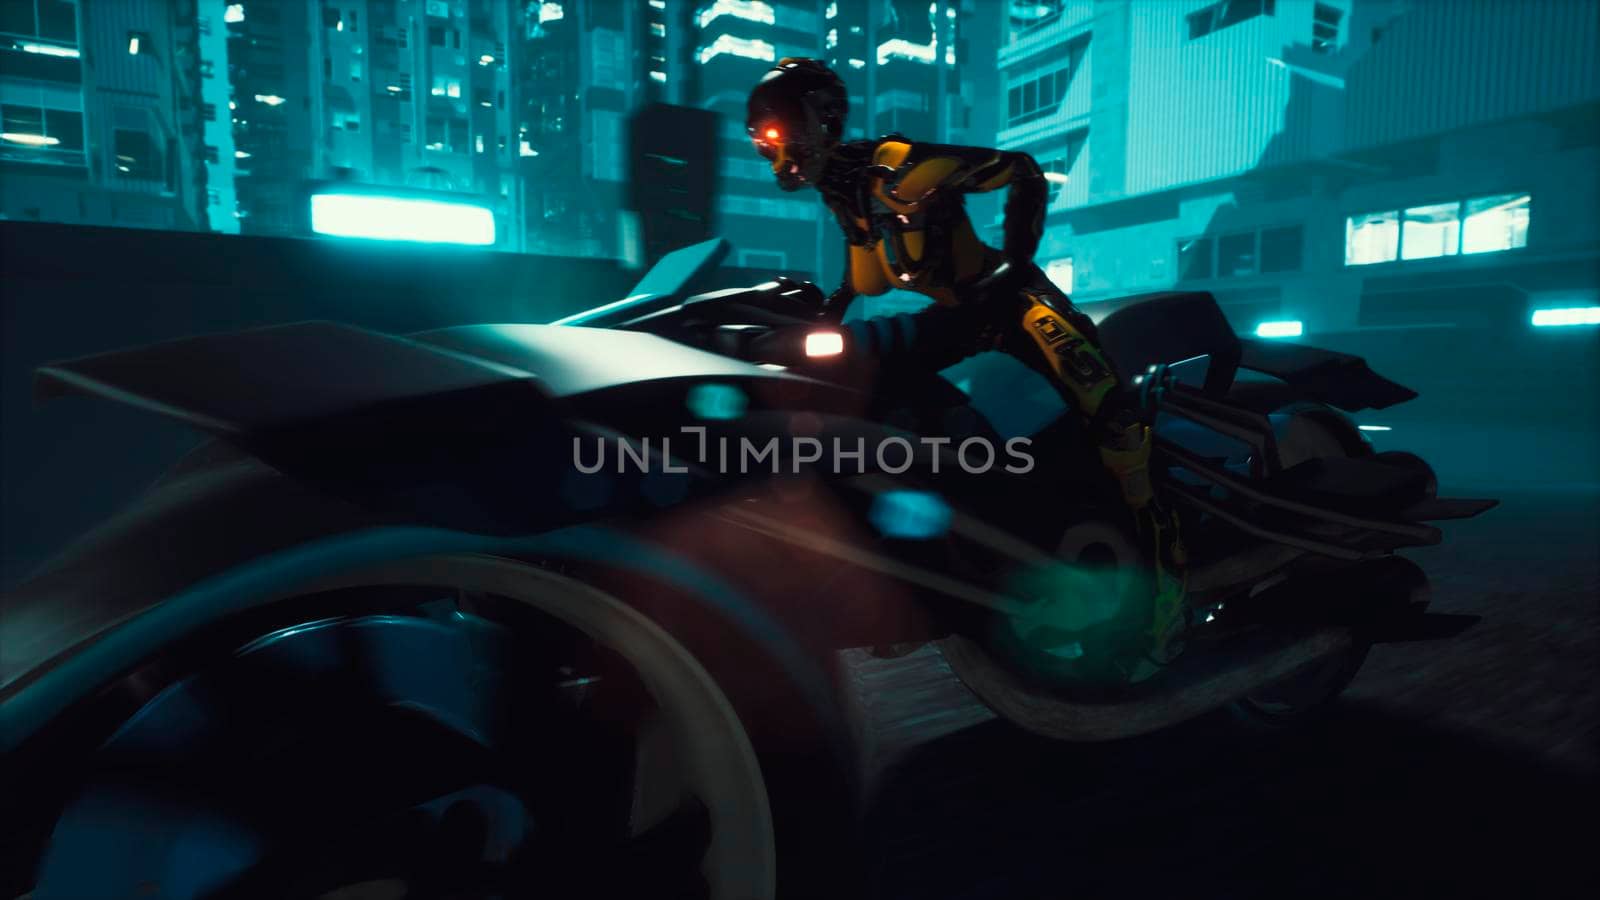 Cyborg rides a huge speed on the motorcycle of the future through the neon streets of the night cyber city. A view of the neon sci-fi city. 3D Rendering. by designprojects